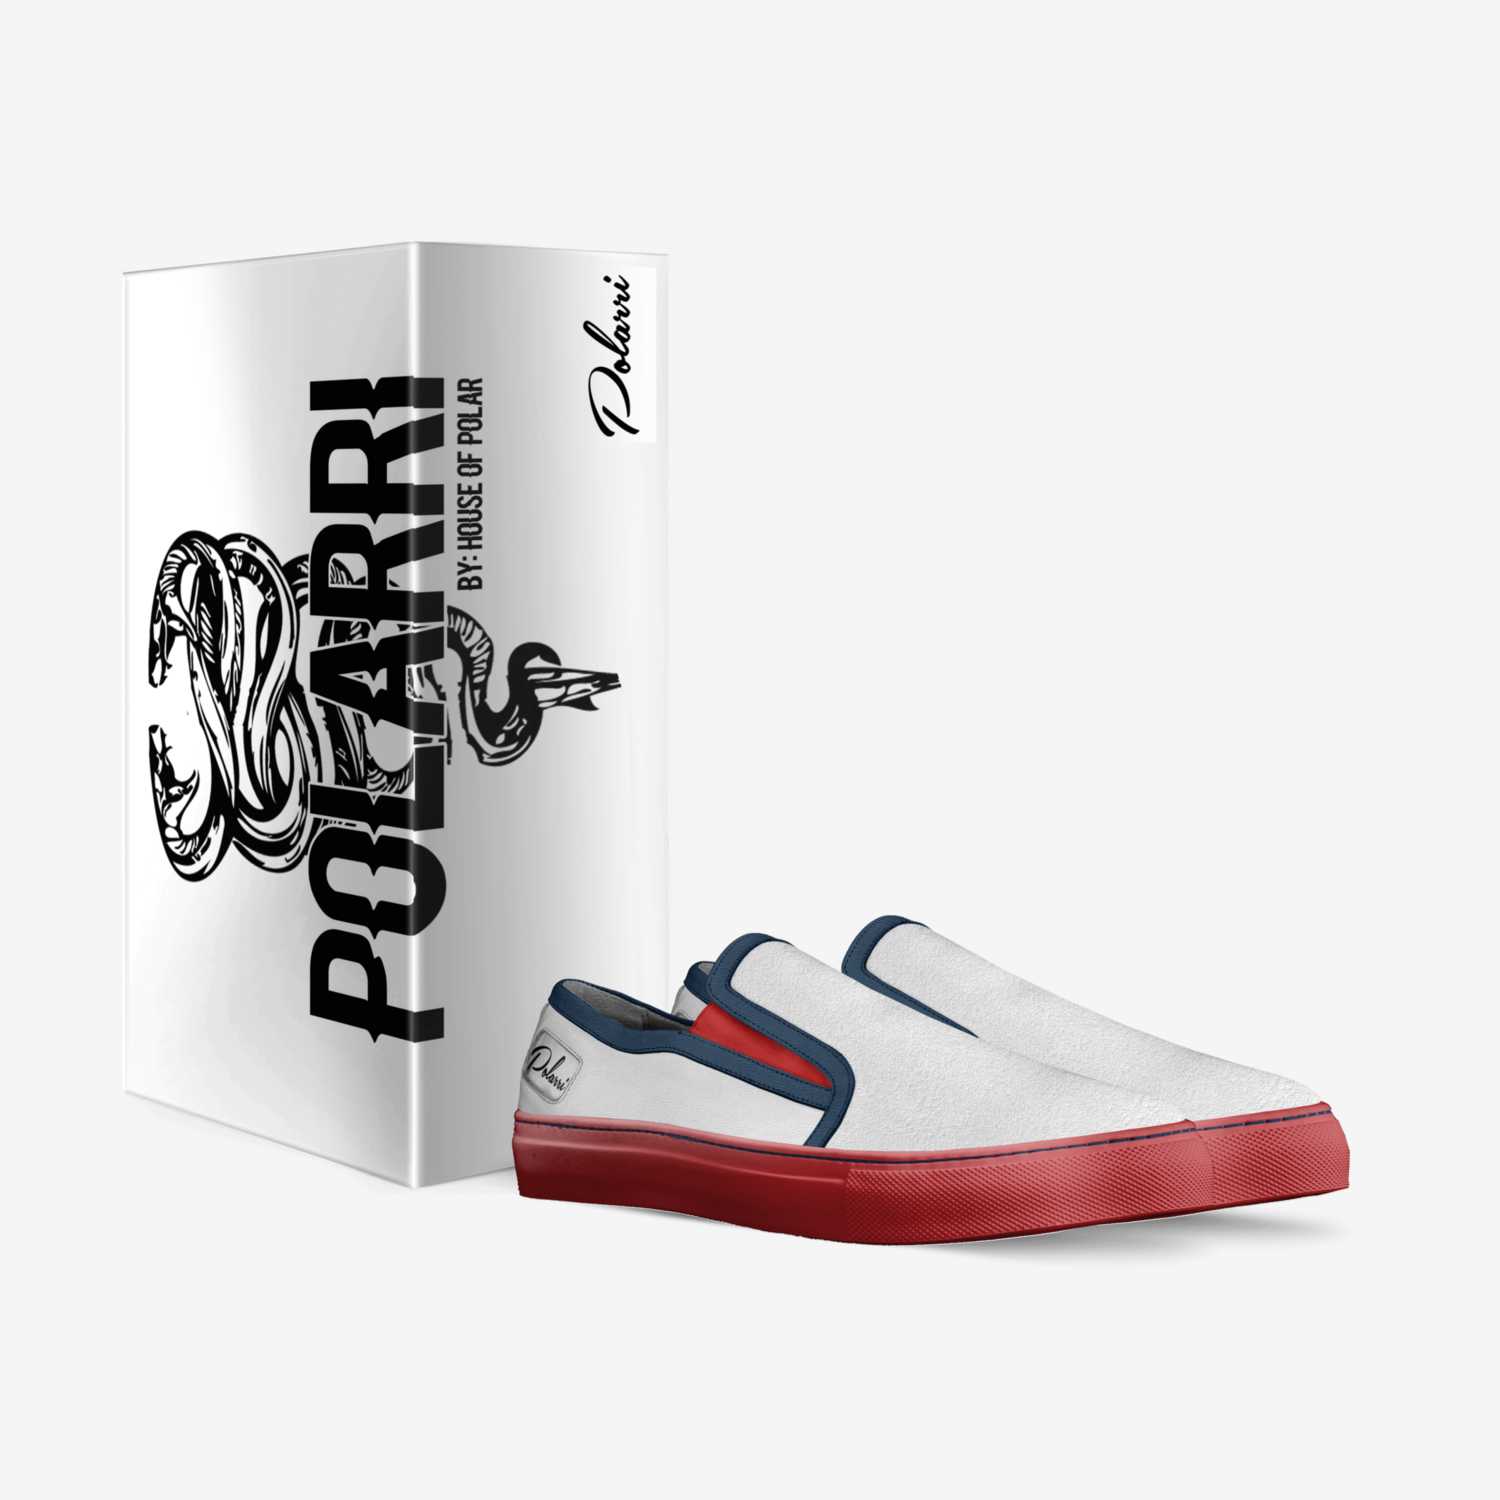 Polarri Heel Ones custom made in Italy shoes by Polarri Brown | Box view